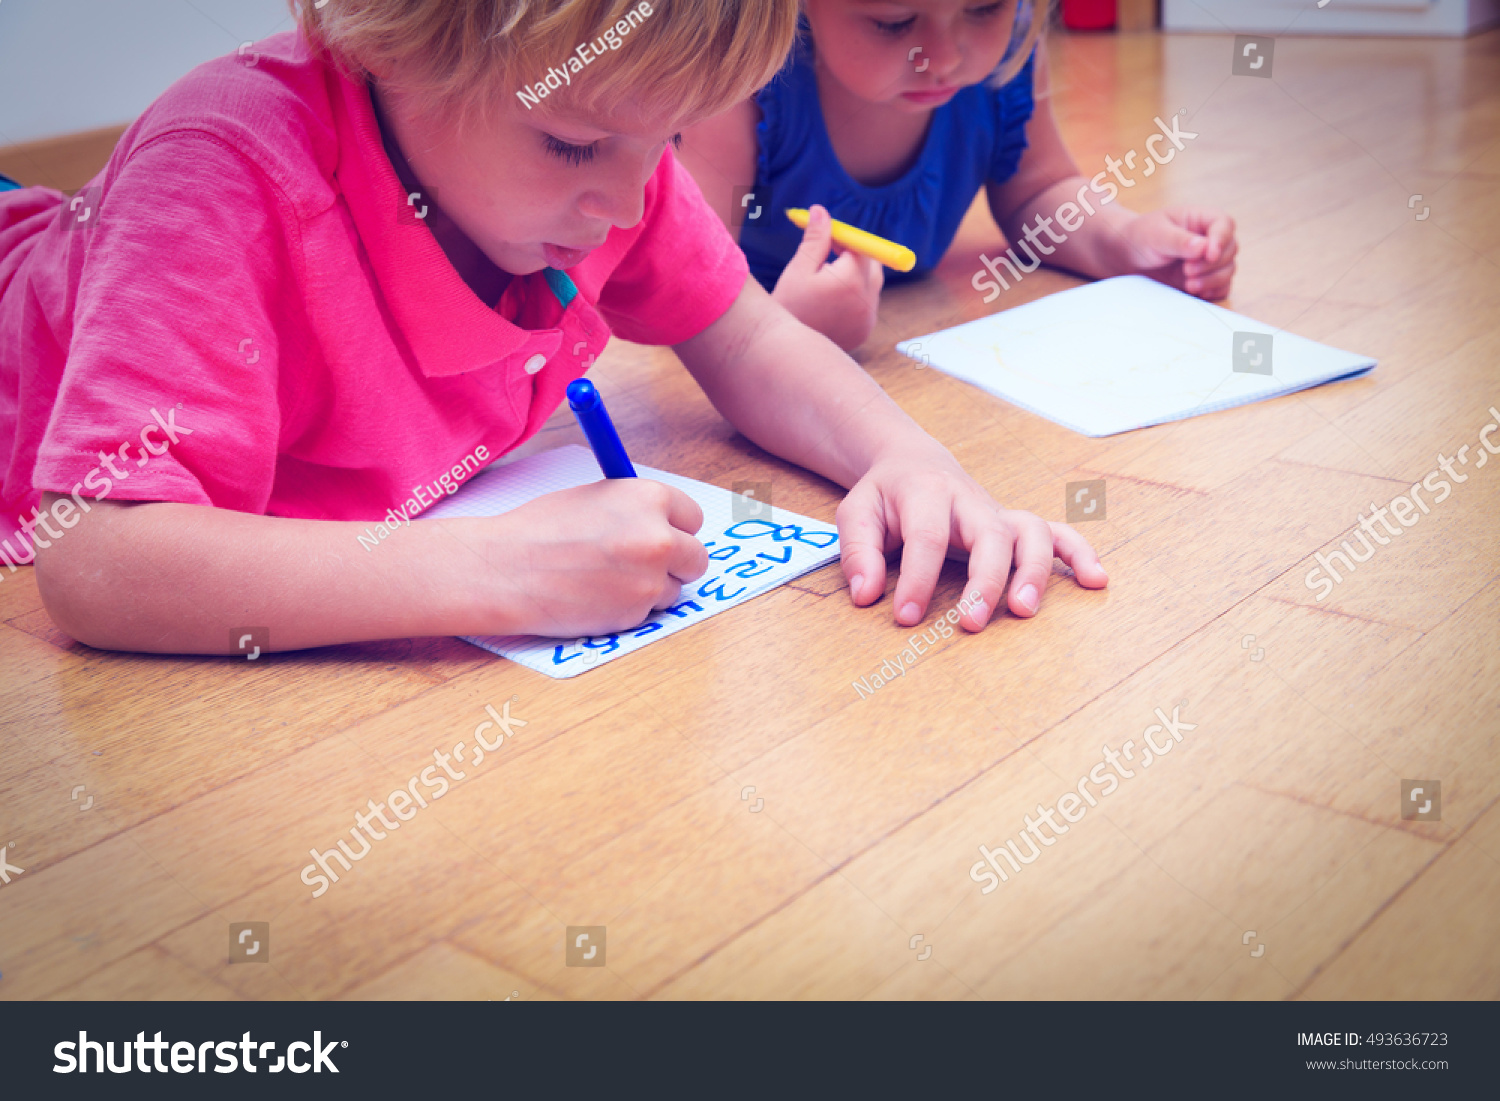 kids-learning-write-numbers-stock-photo-493636723-shutterstock